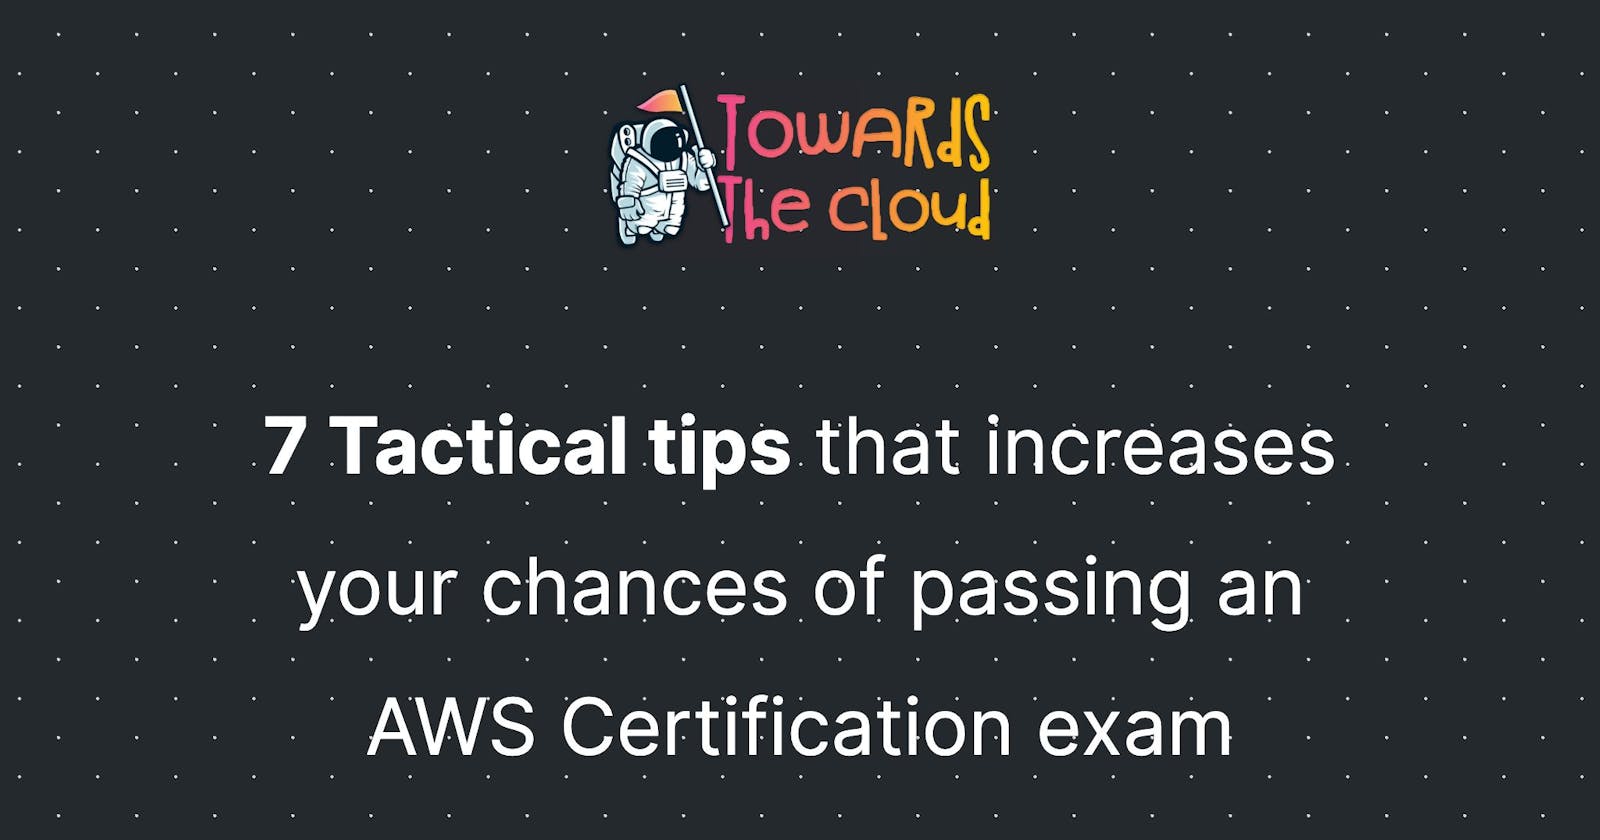 7 Tactical tips that increases your chances of passing an AWS Certification exam